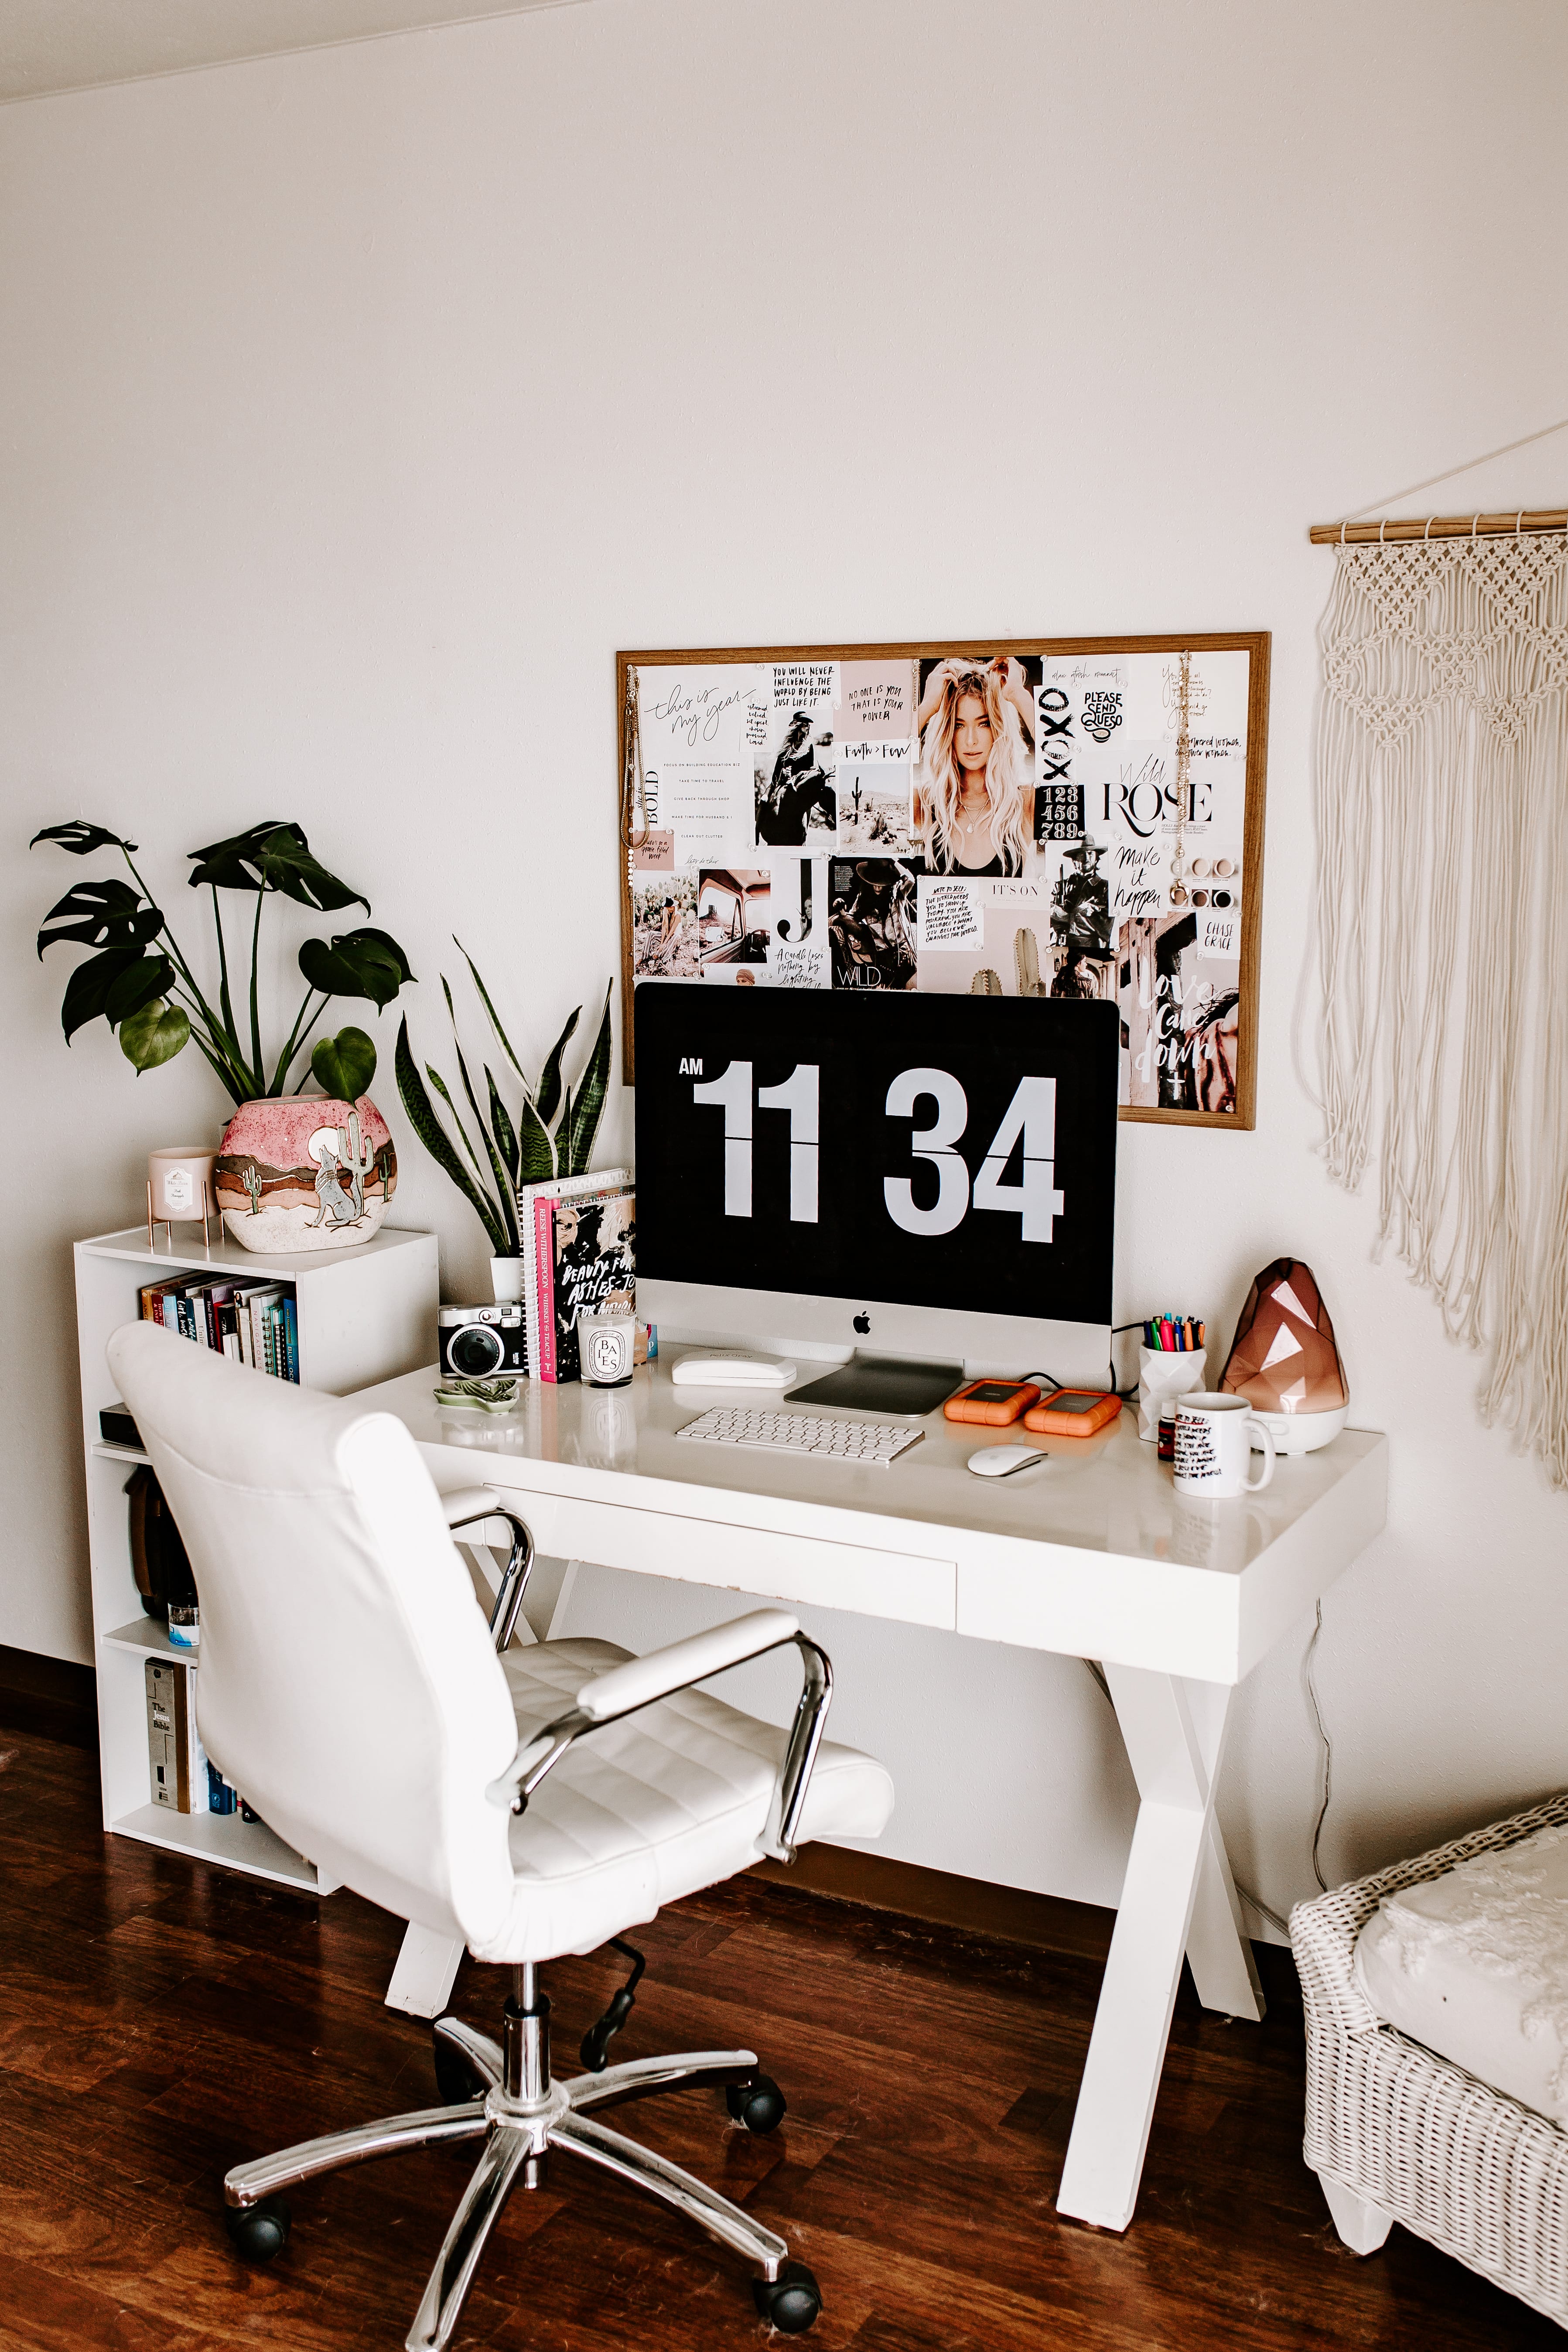 office-vision-mood-board-workspace-jessicavickers.com-1